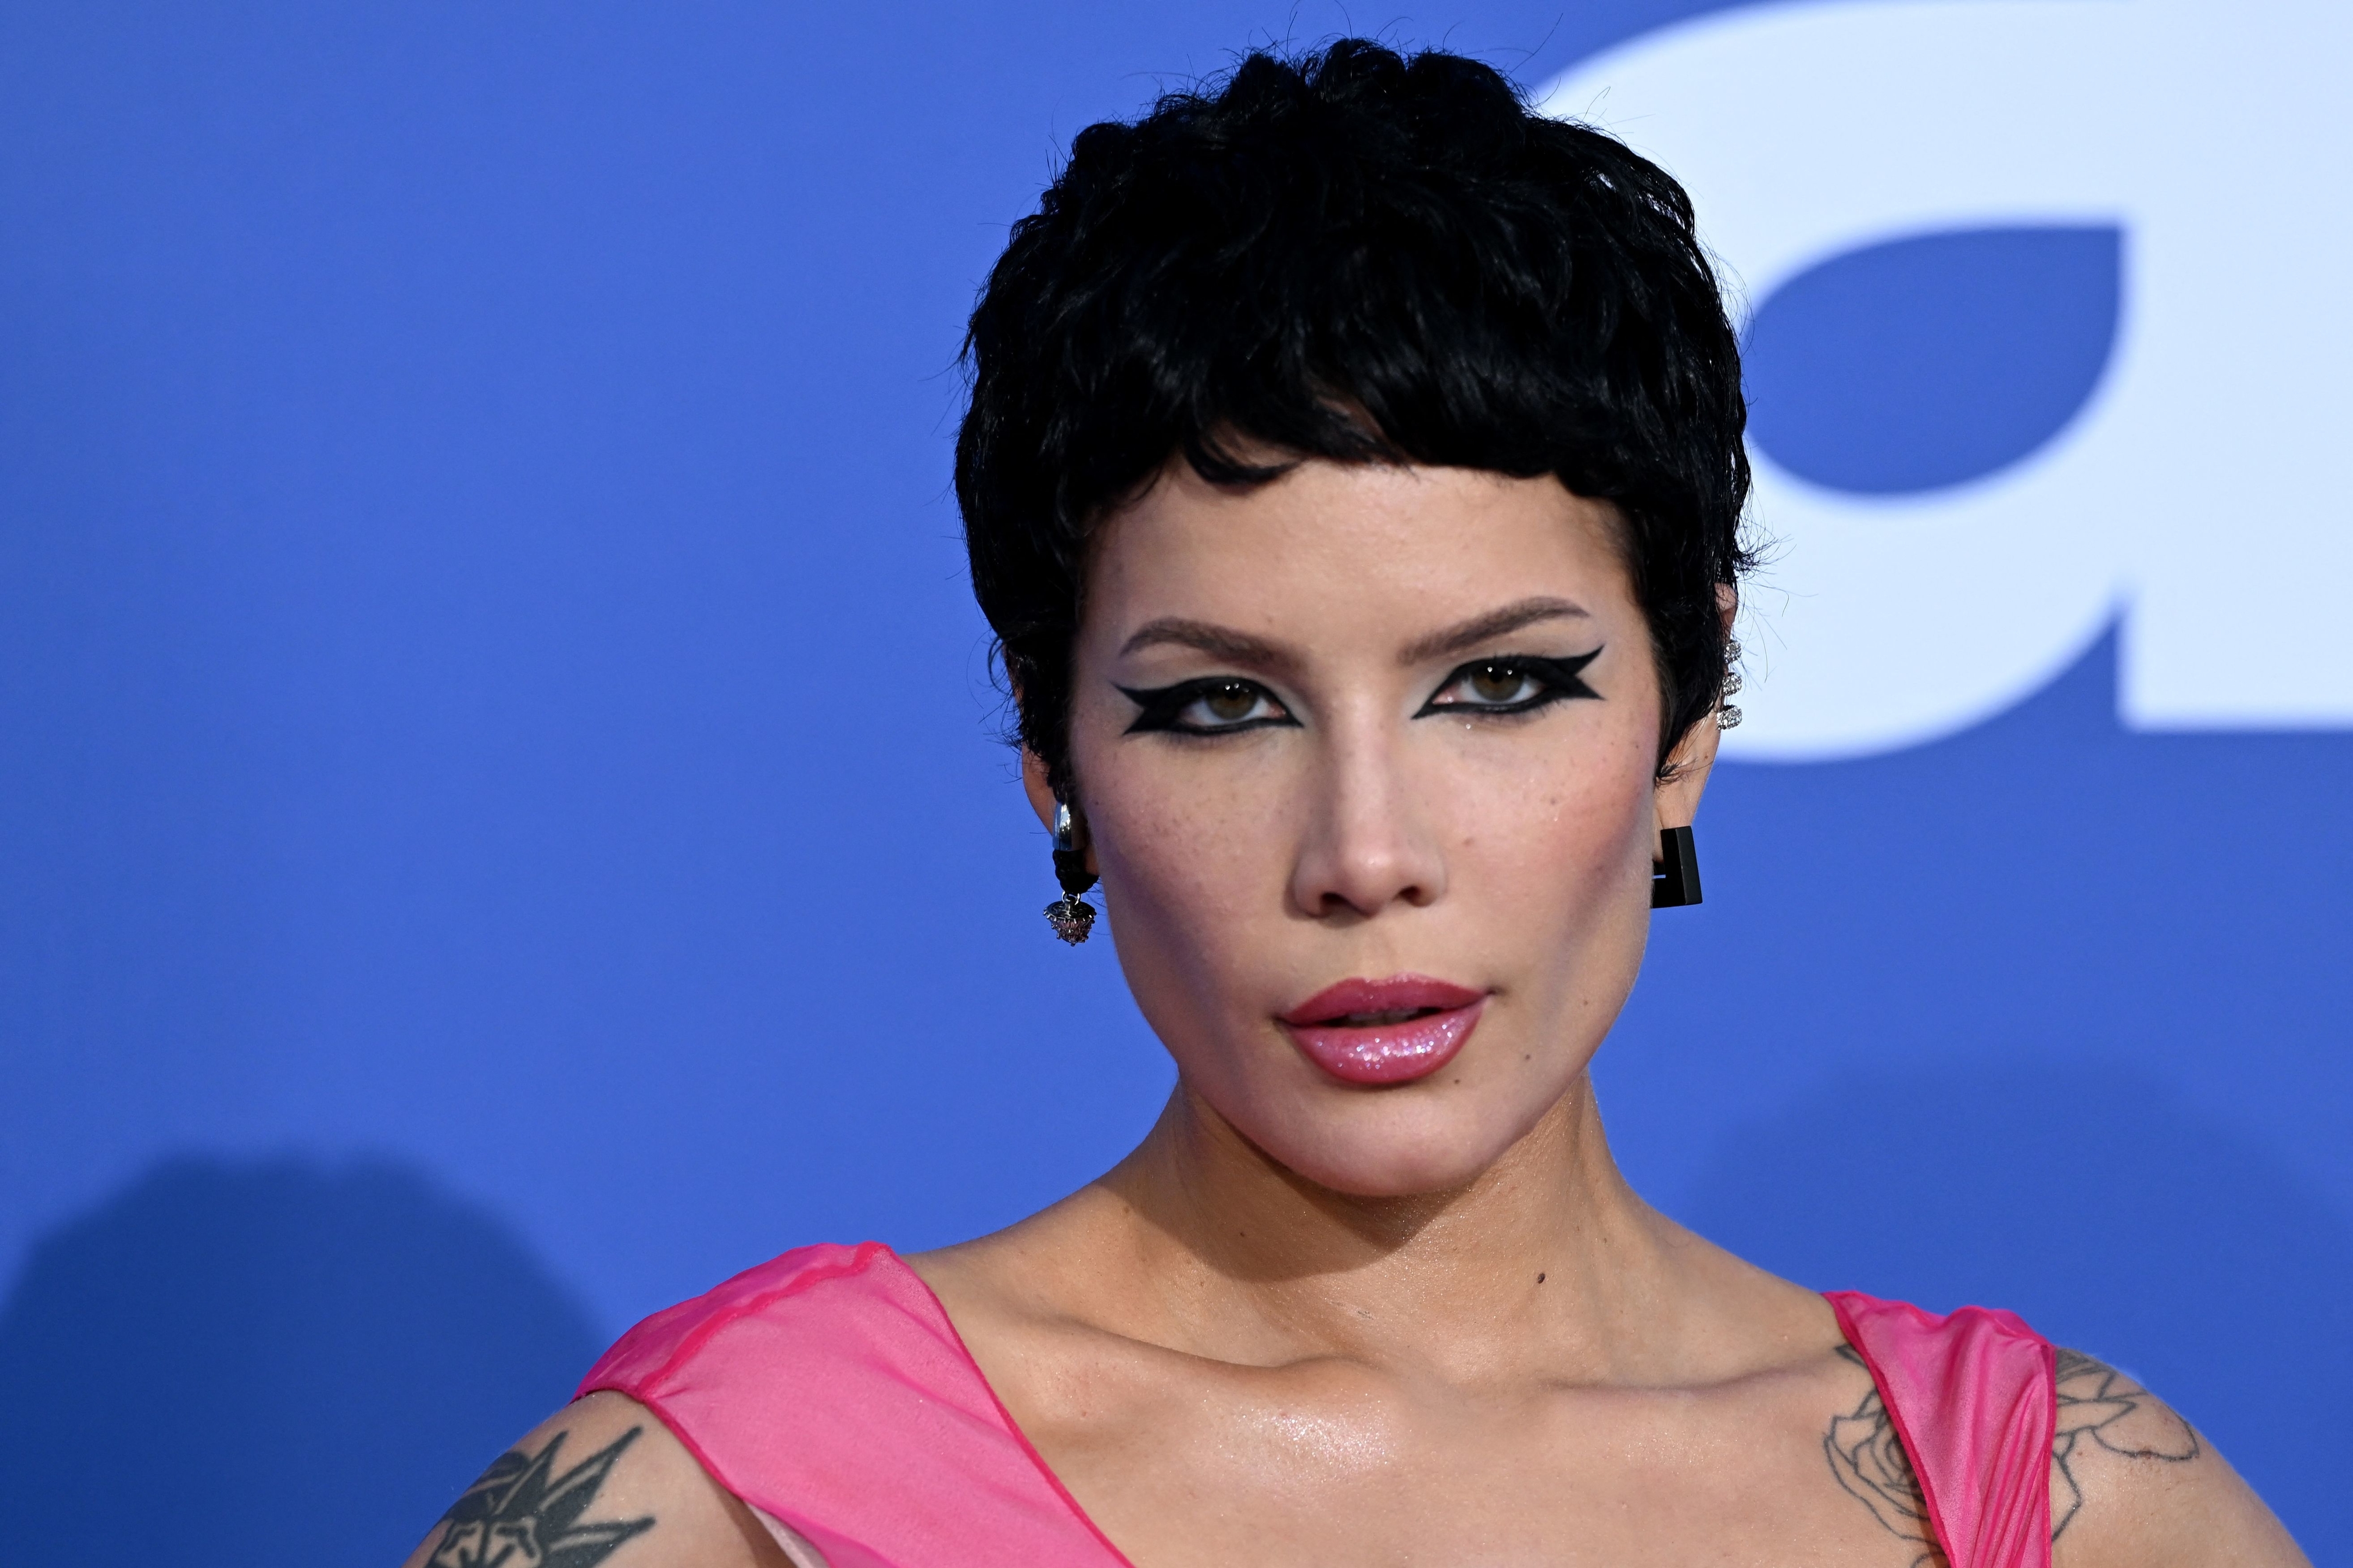 Halsey poses with short hair, winged eyeliner, and a pink top at an event